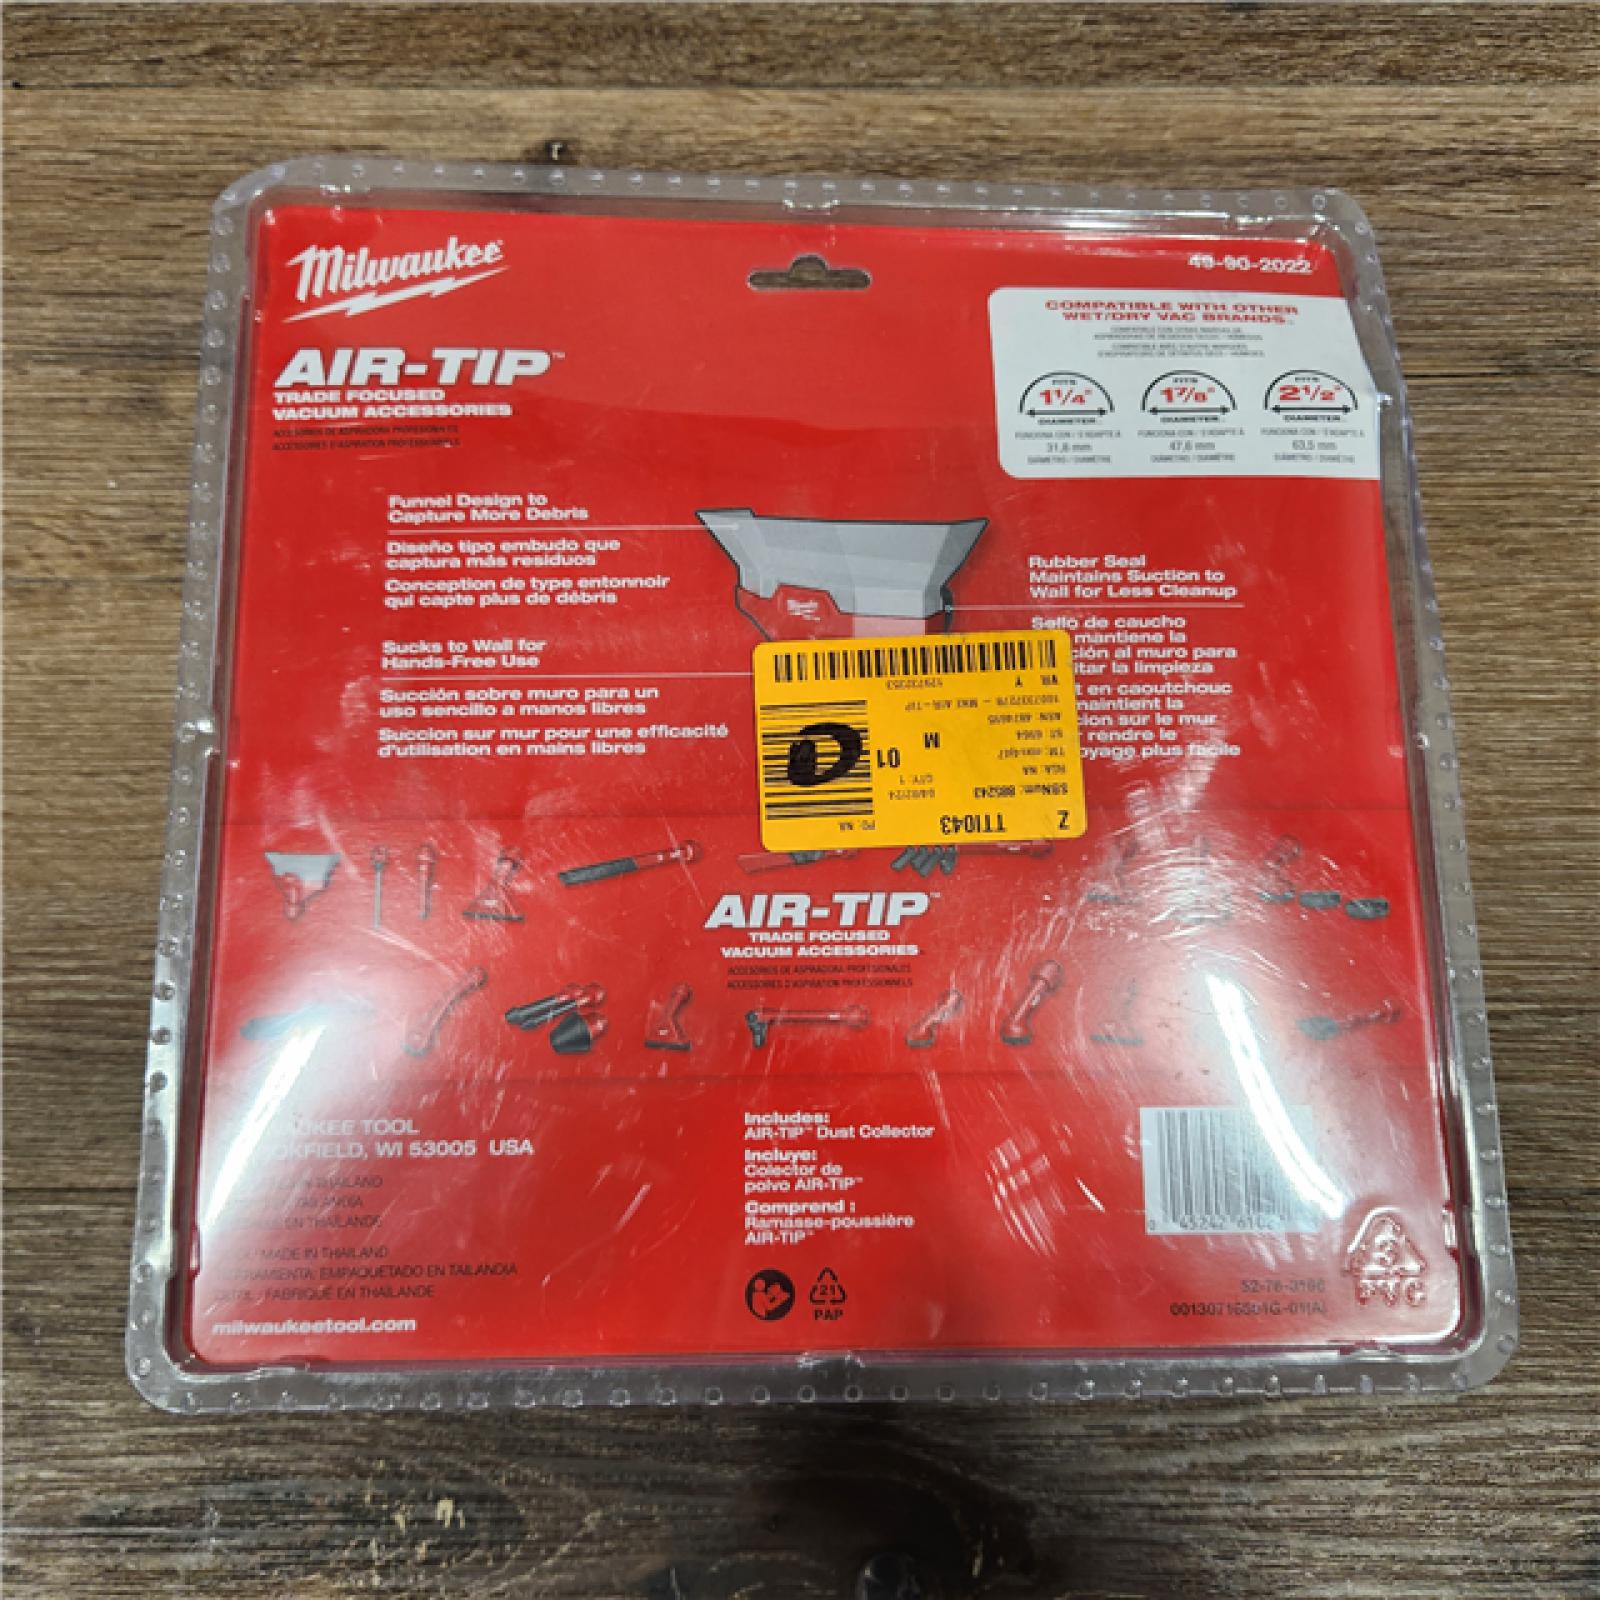 NEW!! Milwaukee Air-Tip Shop Vac Wet/Dry Vac Dust Collector 1 Pc